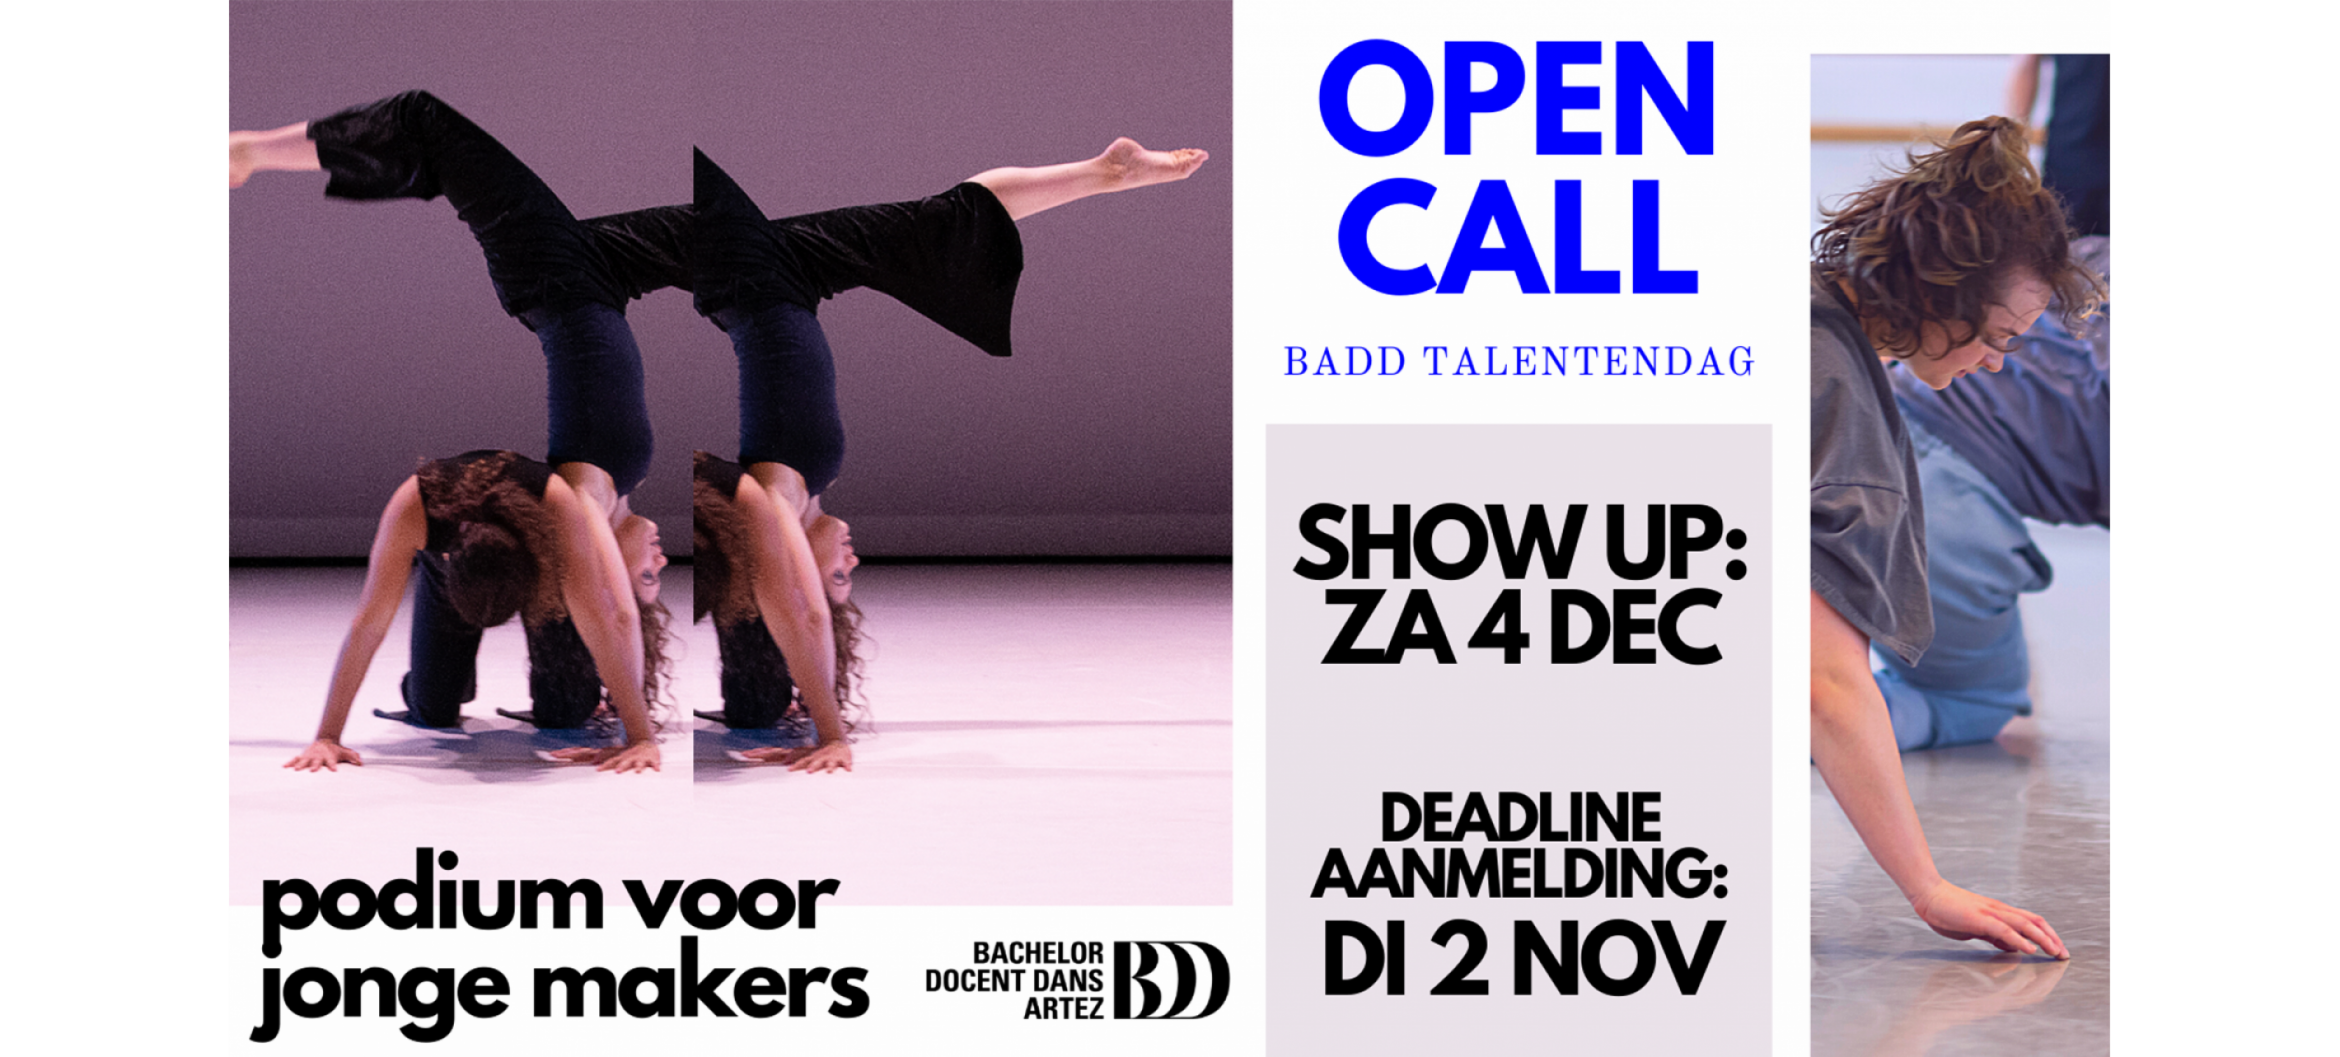 OPEN CALL | Bachelor of Dance Talent Day | SHOW UP!